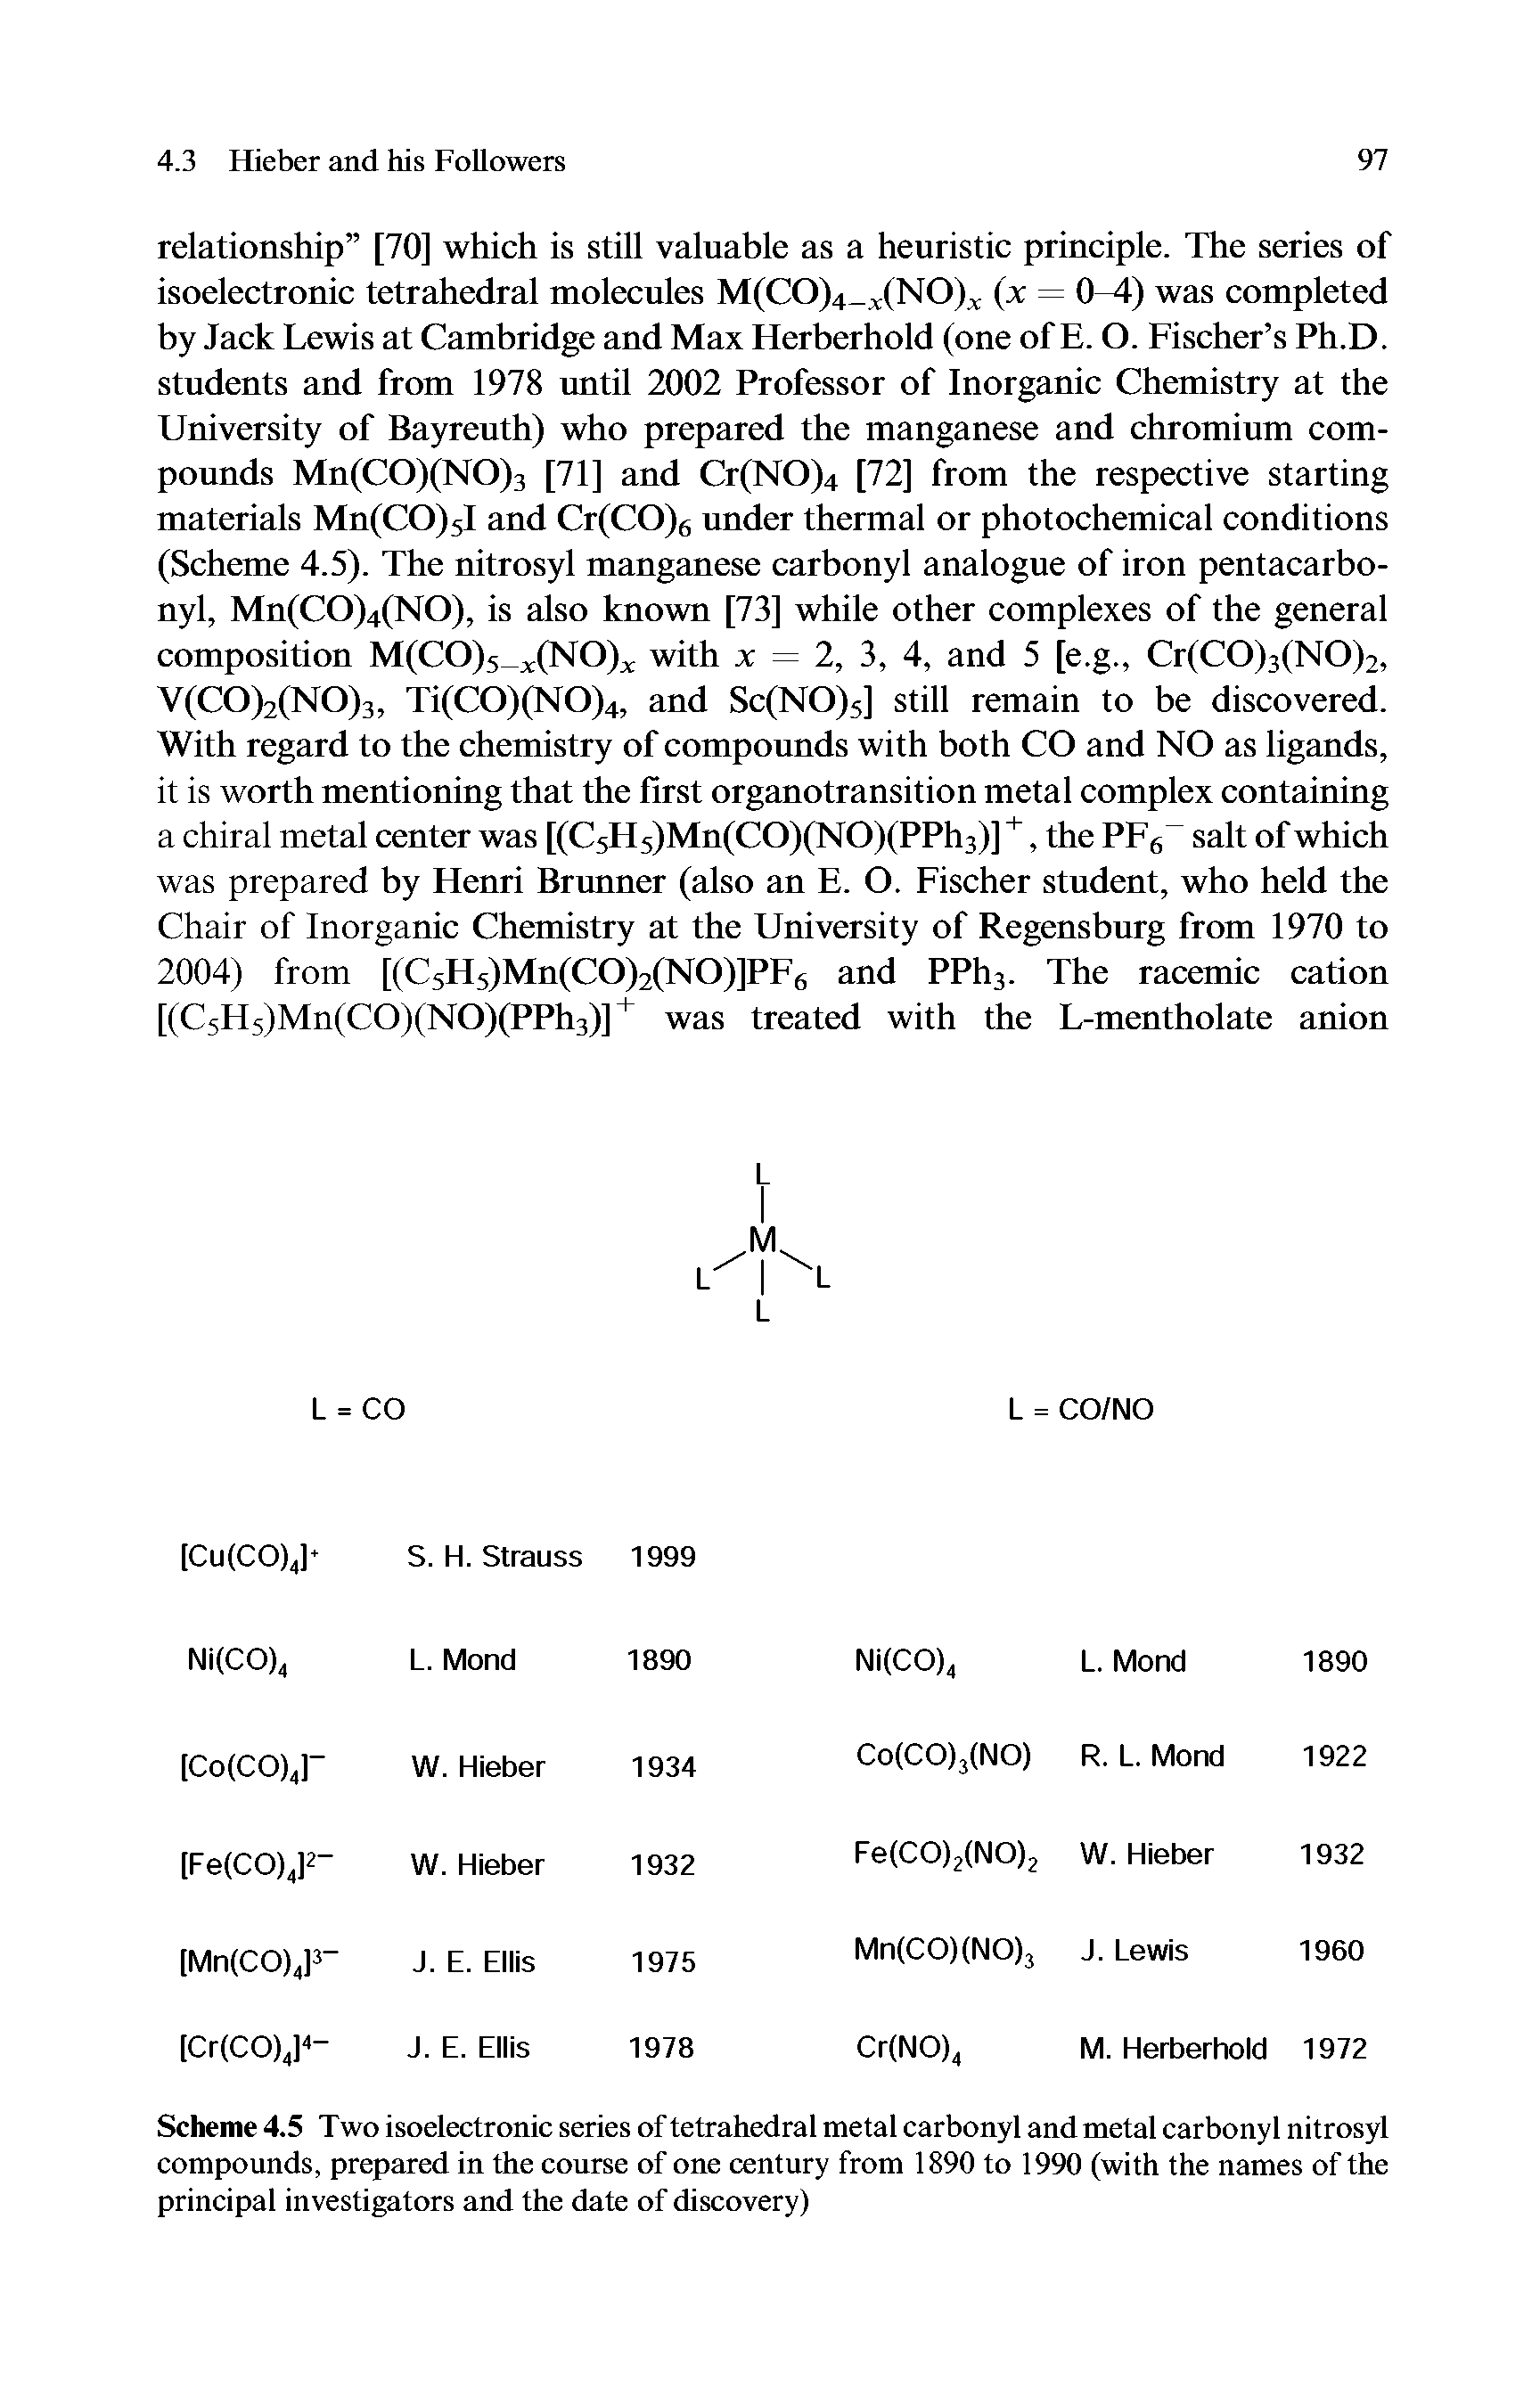 Scheme 4.5 T wo isoelectronic series of tetrahedral metal carbonyl and metal carbonyl nitrosyl compounds, prepared in the course of one century from 1890 to 1990 (with the names of the principal investigators and the date of discovery)...